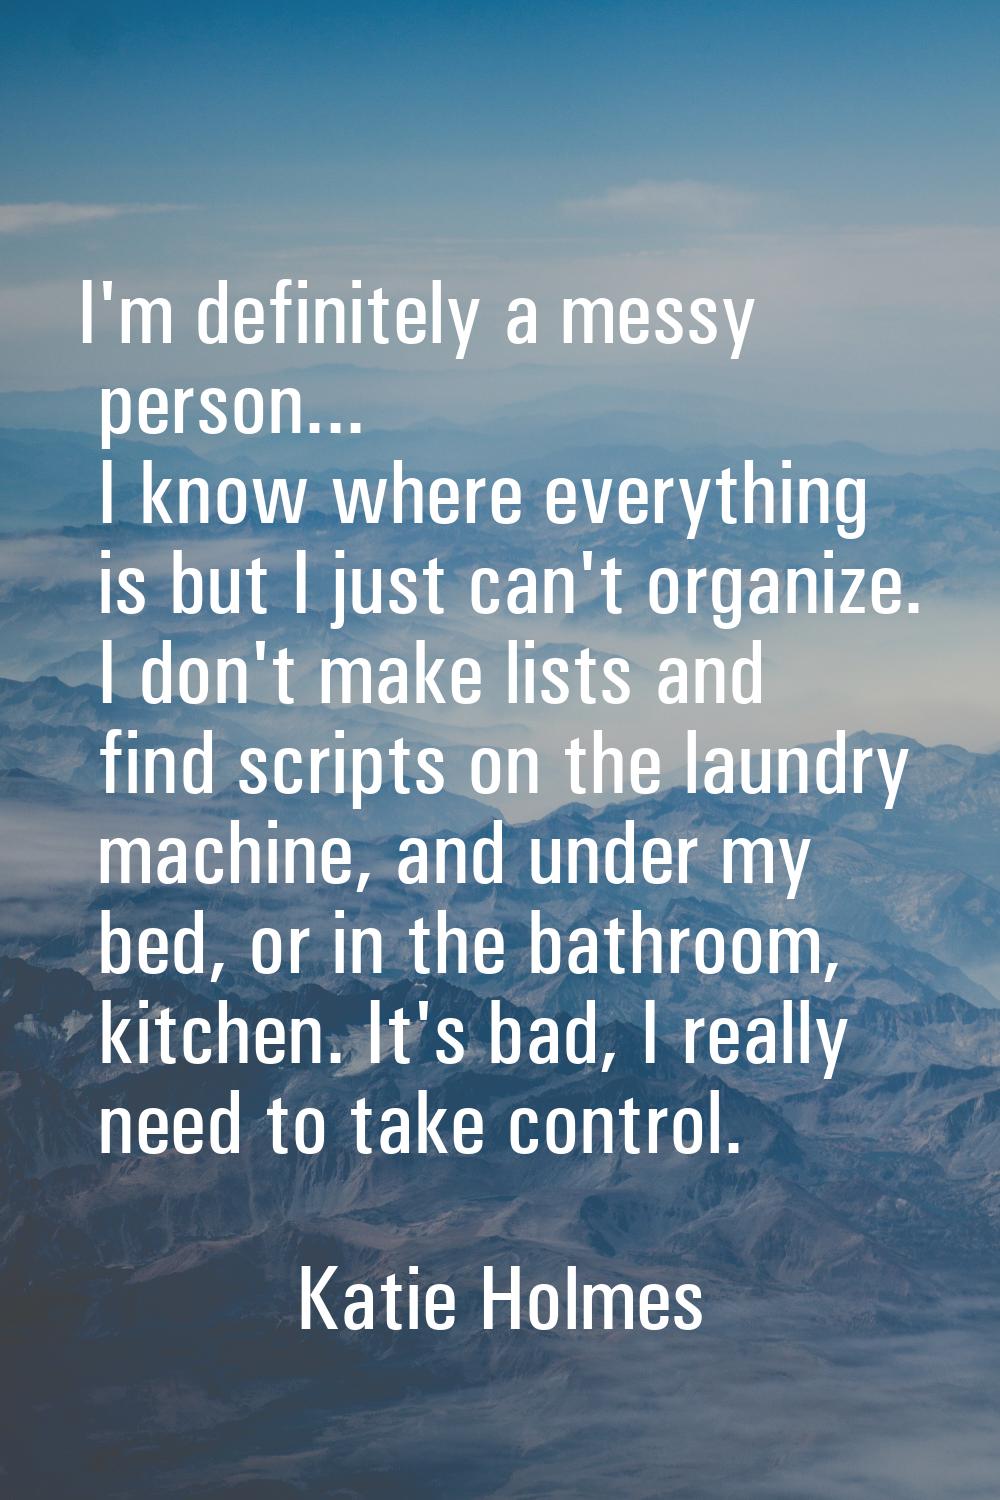 I'm definitely a messy person... I know where everything is but I just can't organize. I don't make